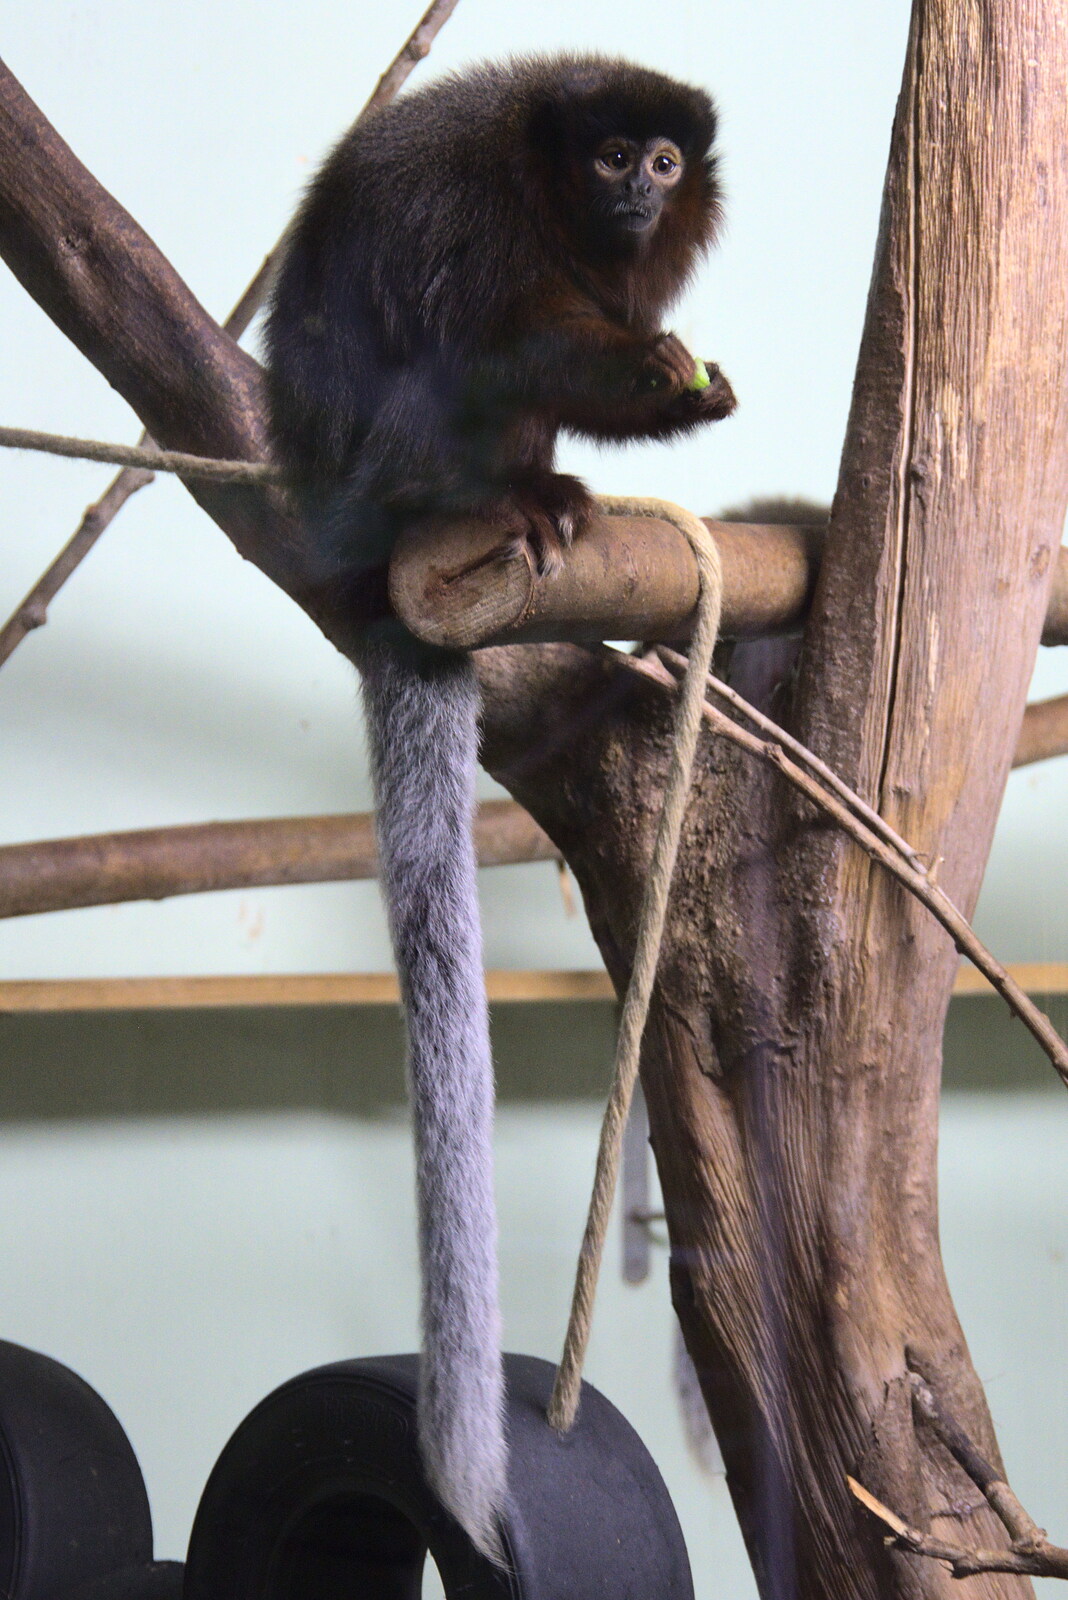 A Few Hours at the Zoo, Banham, Norfolk - 8th January 2023: A small monkey with a very long tail